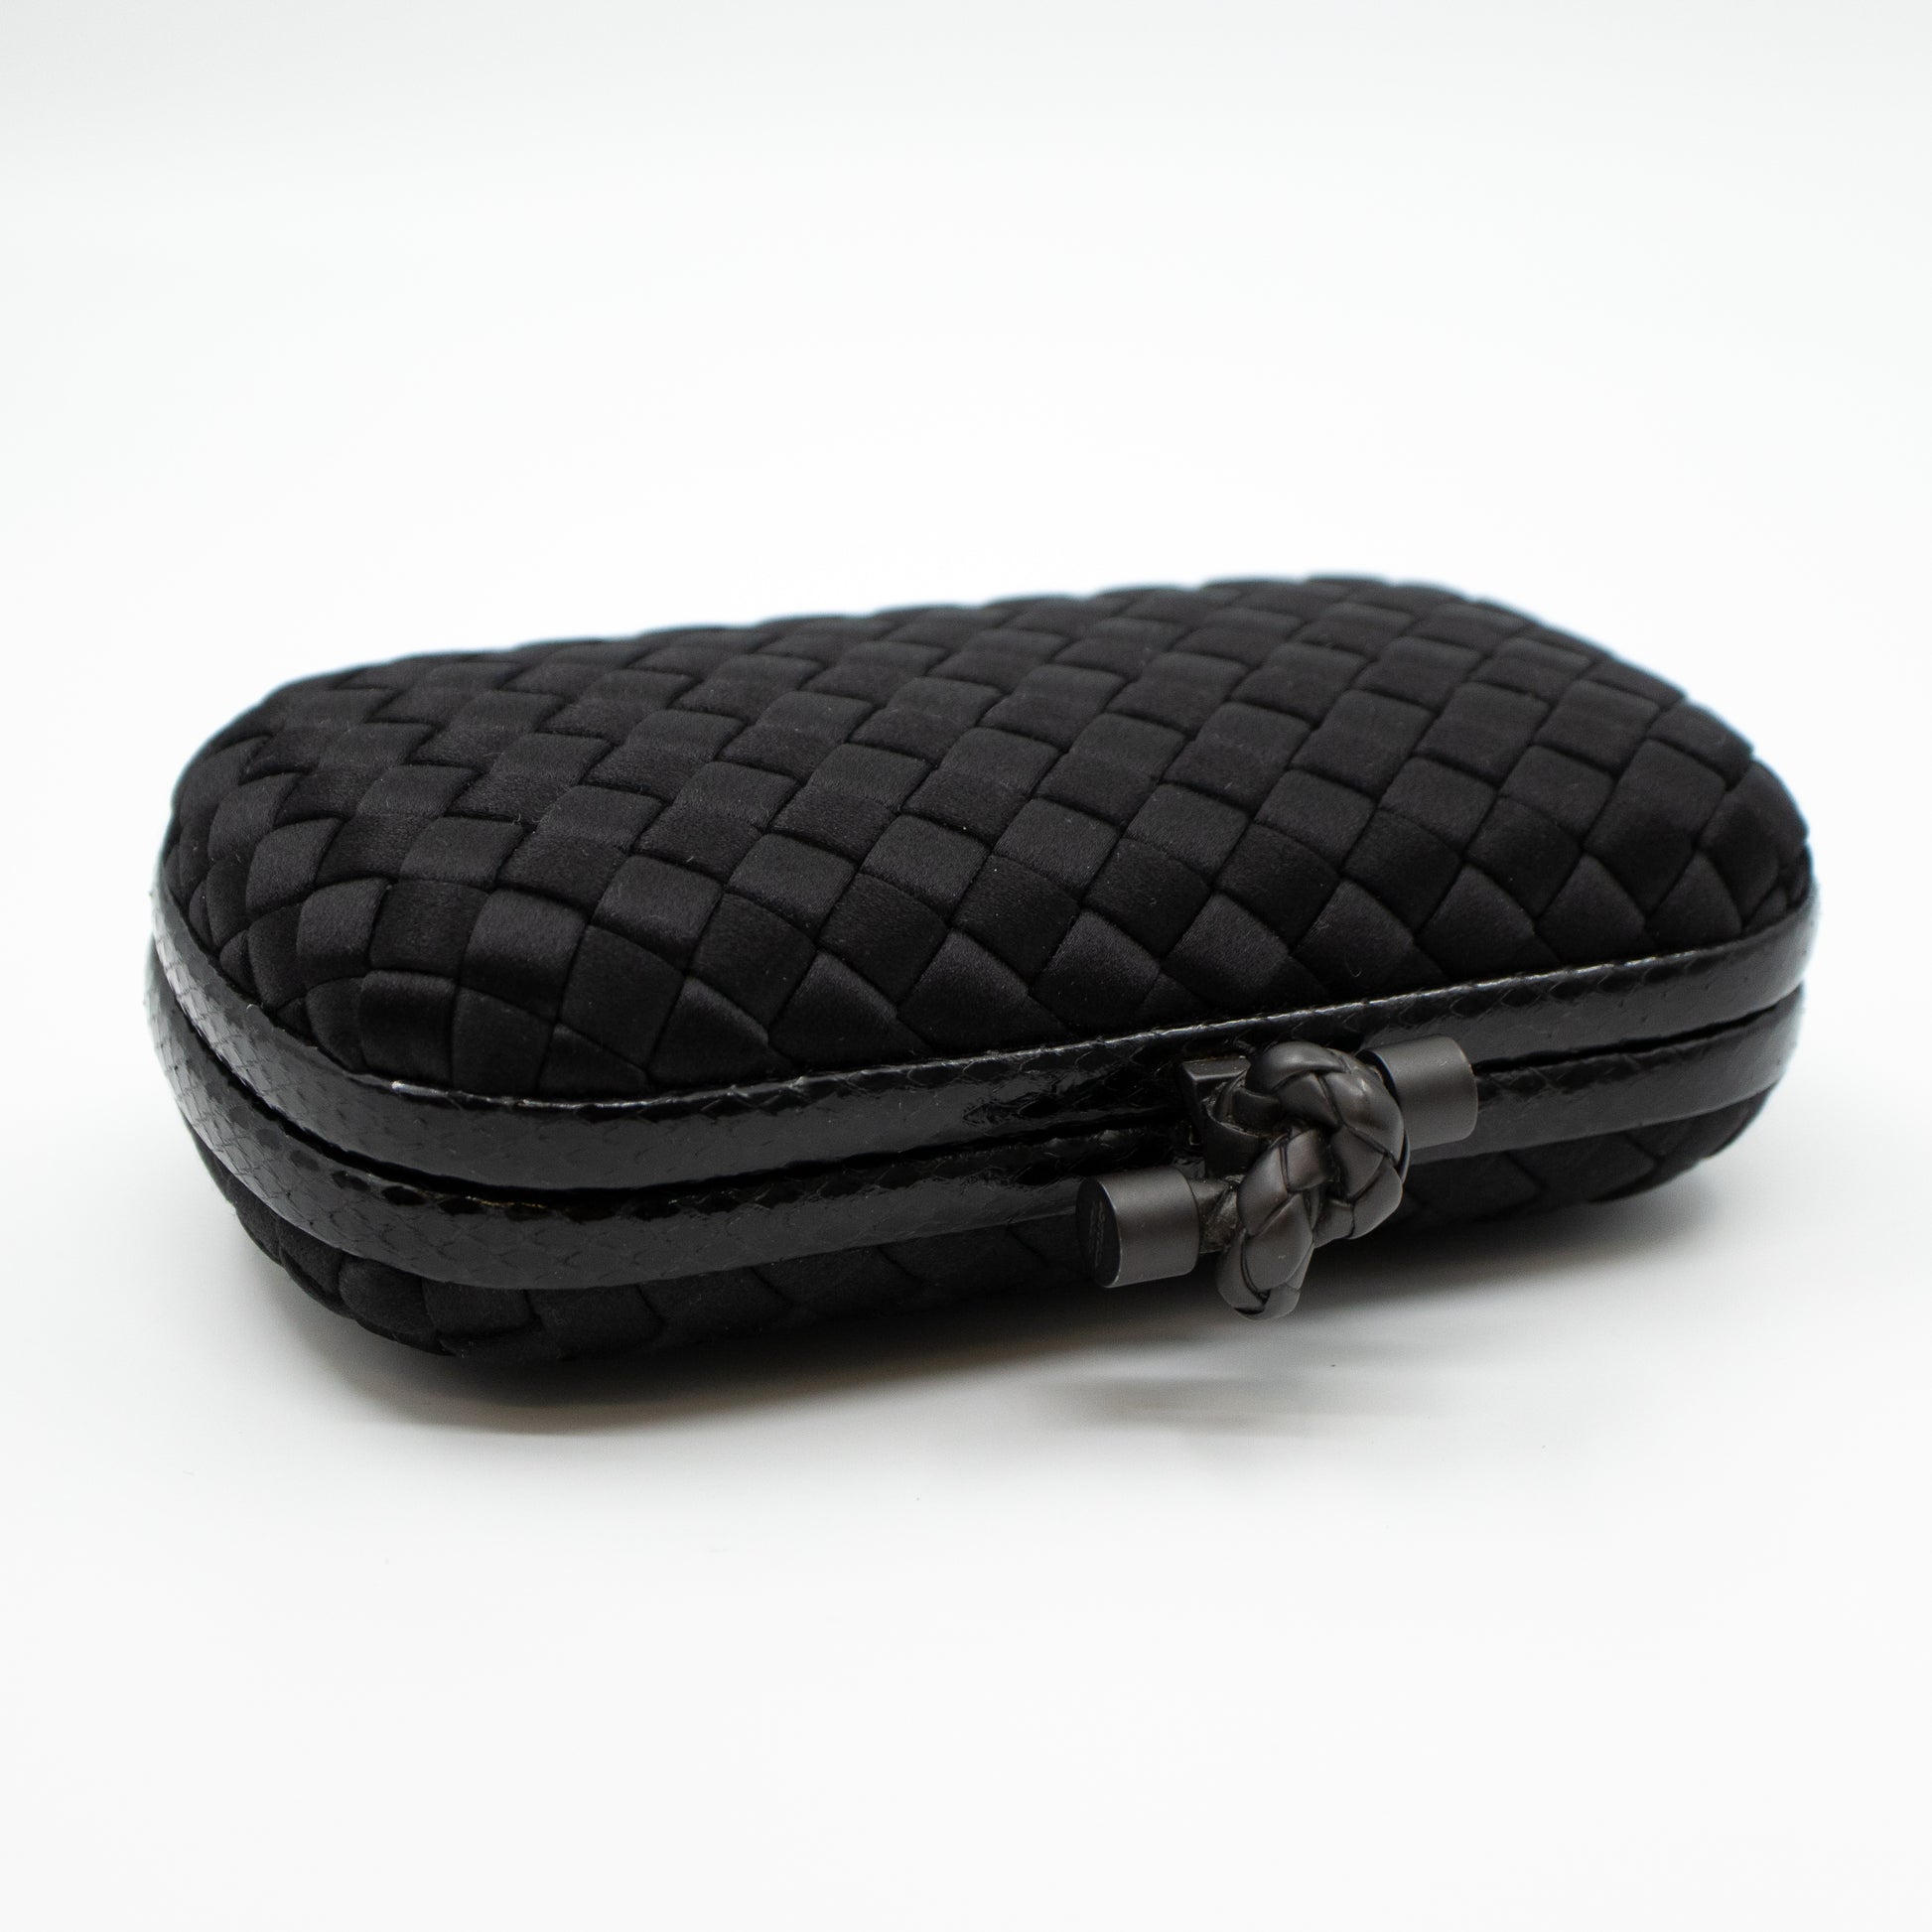 BOTTEGA VENETA, Knot bag, clutch, black braided satin and snake-embossed  leather, rigid model with top fastening in the form of a knot. inside  marked BOTTEGA VENETA MADE IN ITALY. Vintage Clothing 